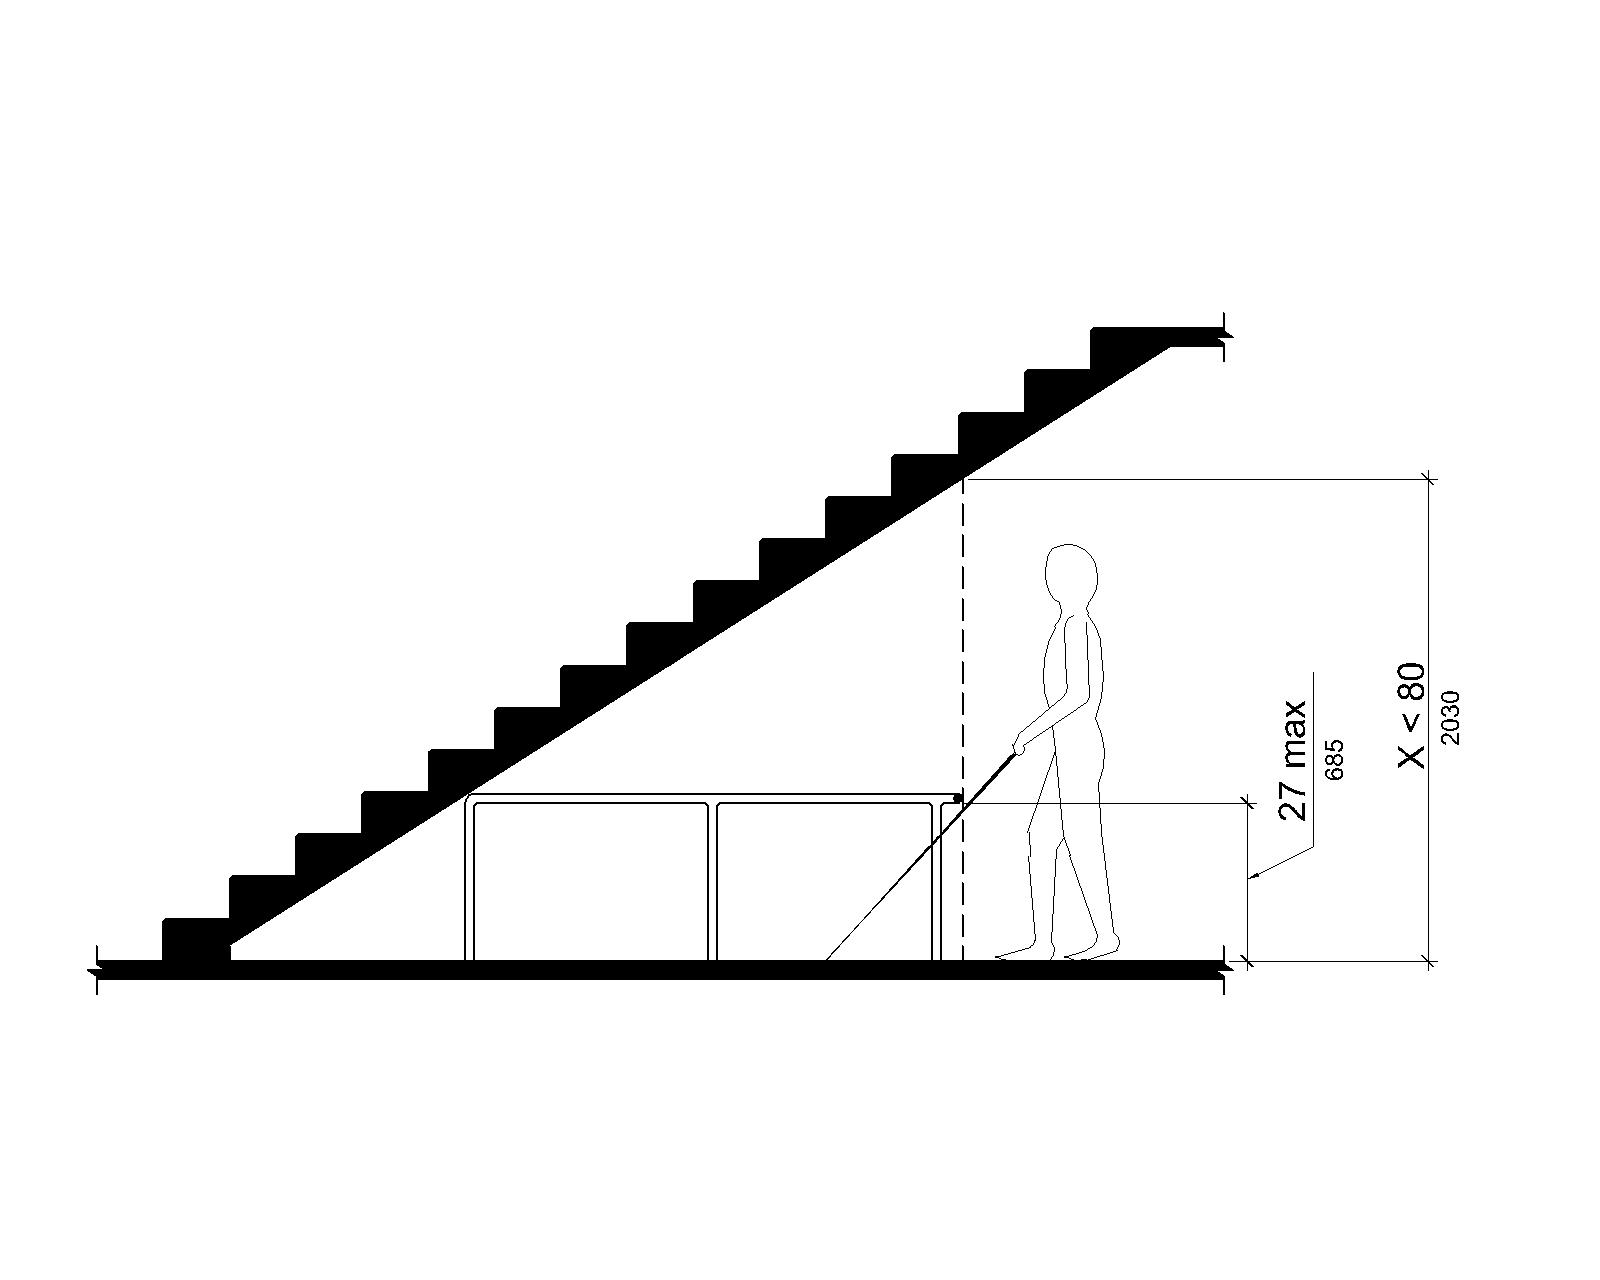 A person using a long cane is shown approaching the sloped underside of a staircase. A portion of the area below the stairs in front of the person has a vertical clearance less than 80 inches (2030 mm). A railing 27 inches (685 mm) high maximum separates this space from the areas where a vertical clearance at or above 80 inches (2030 mm) is maintained.